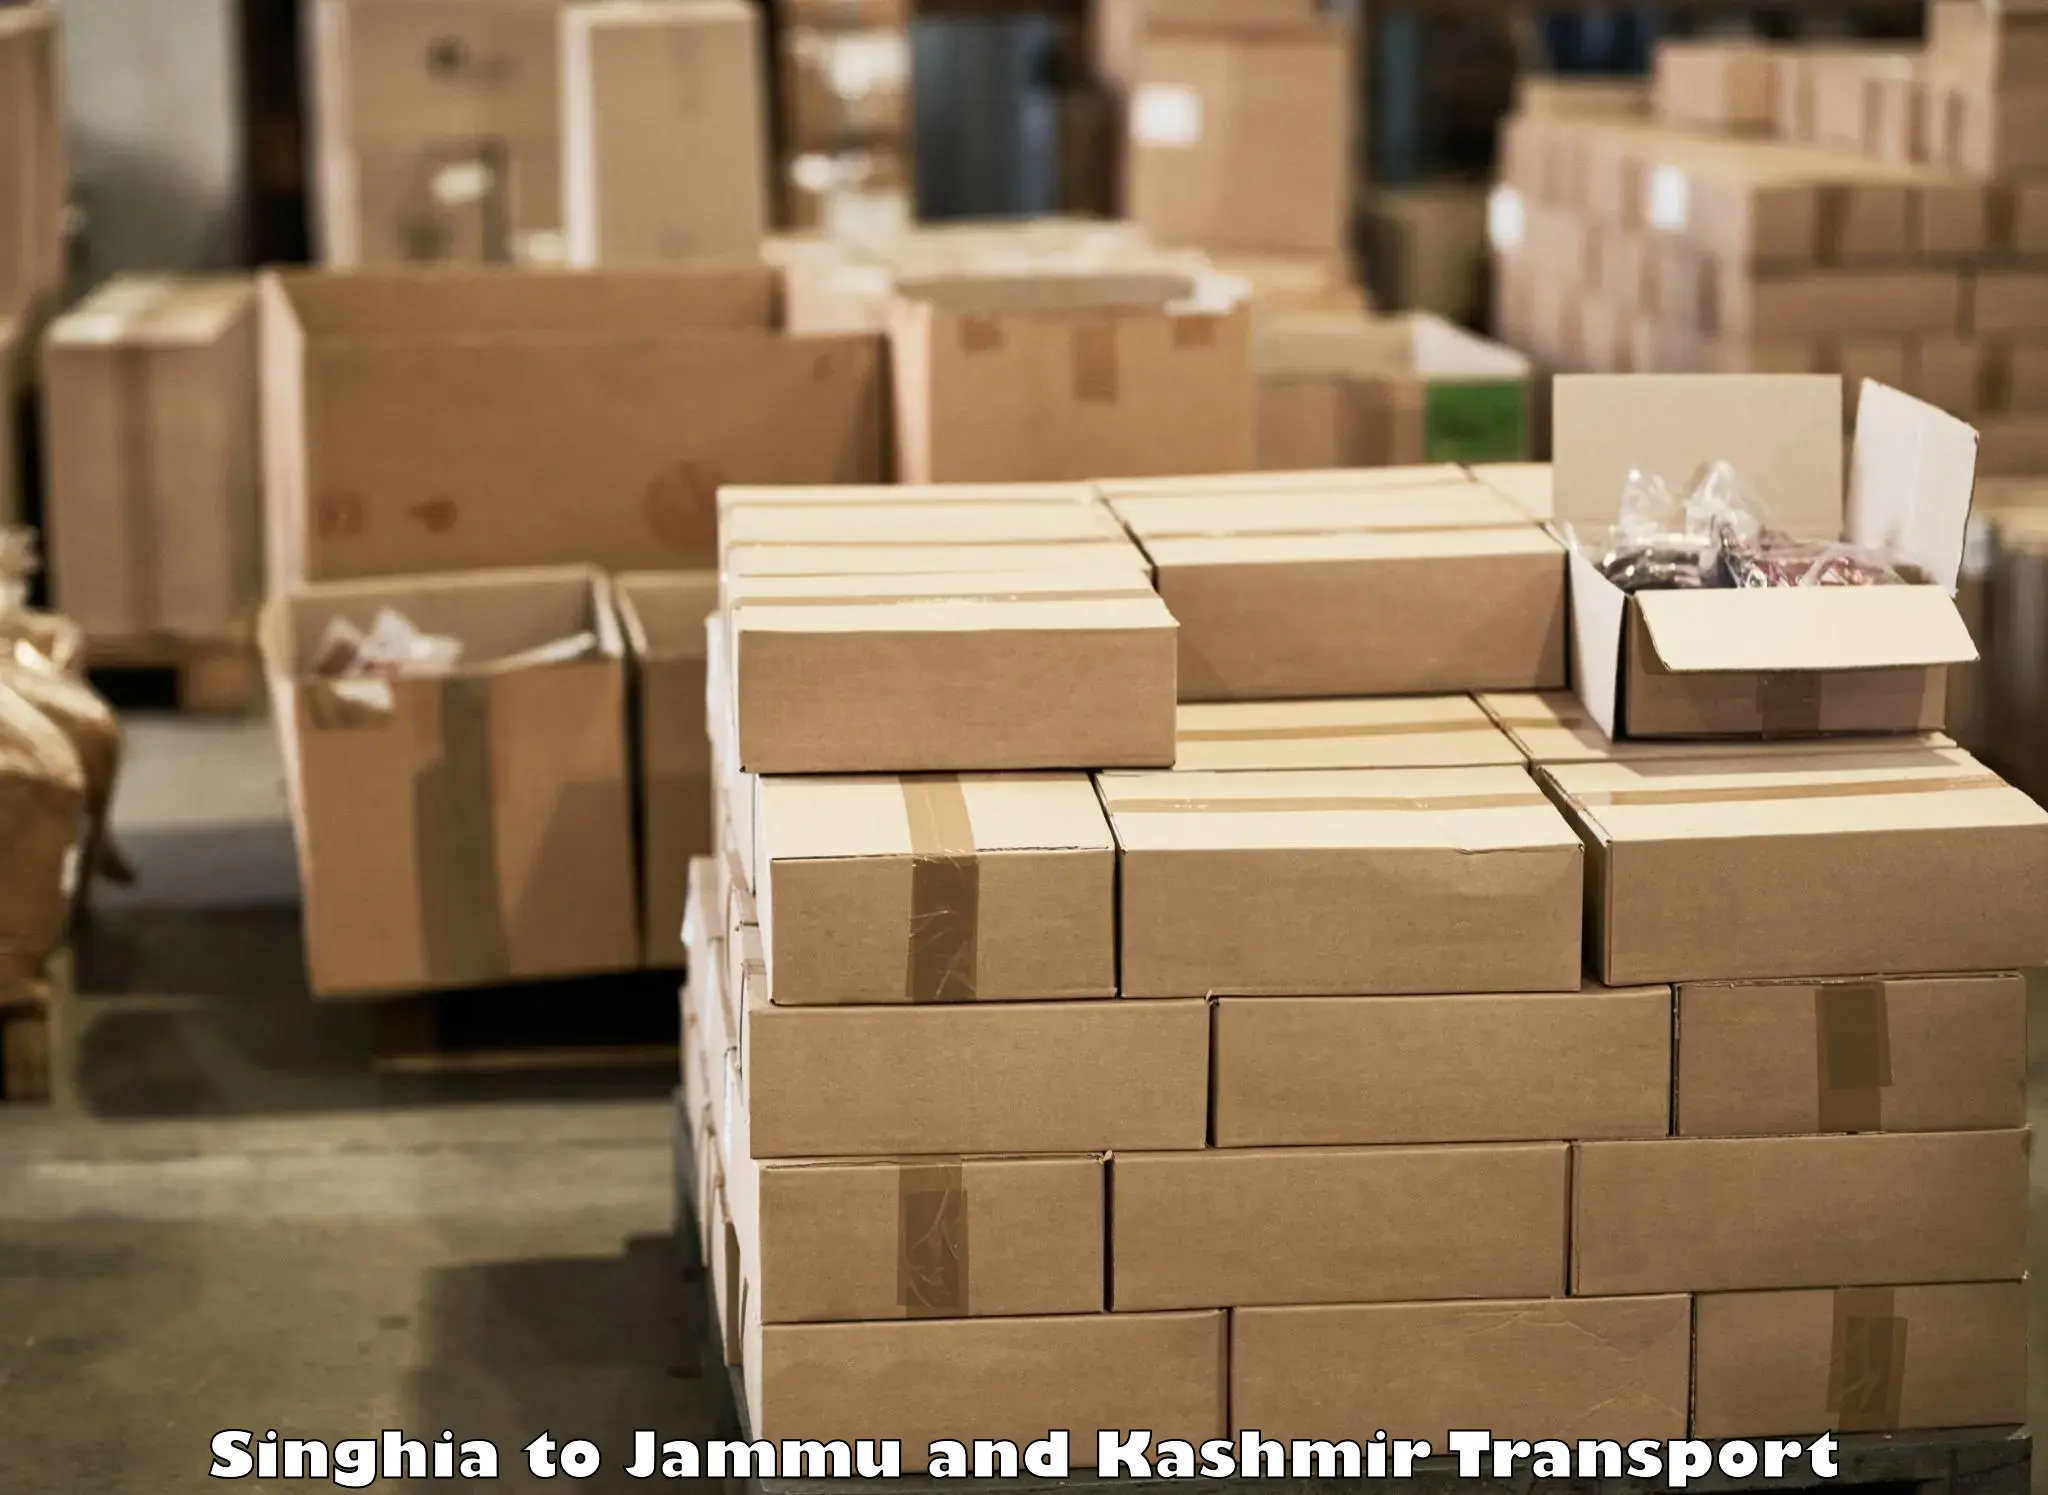 Vehicle transport services Singhia to Baramulla